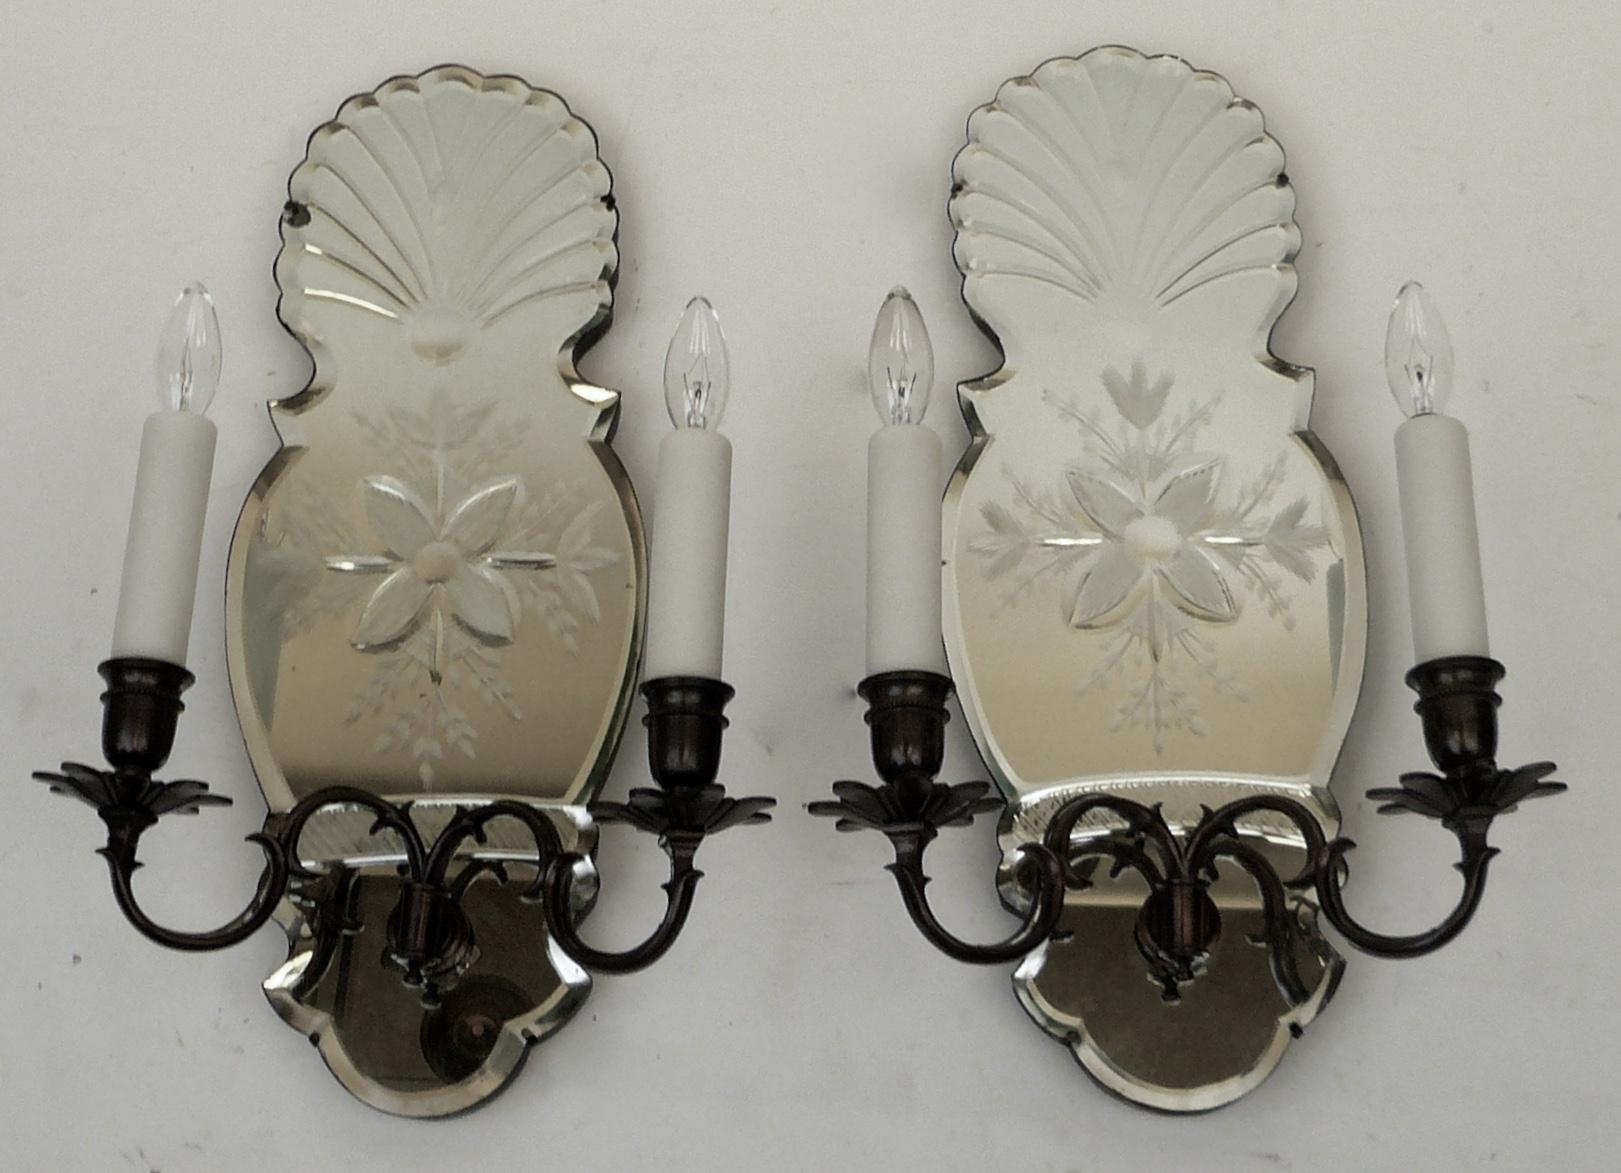 These handsome early Georgian style sconces feature wheel cut mirrored backs, with shell and snowflake motifs.